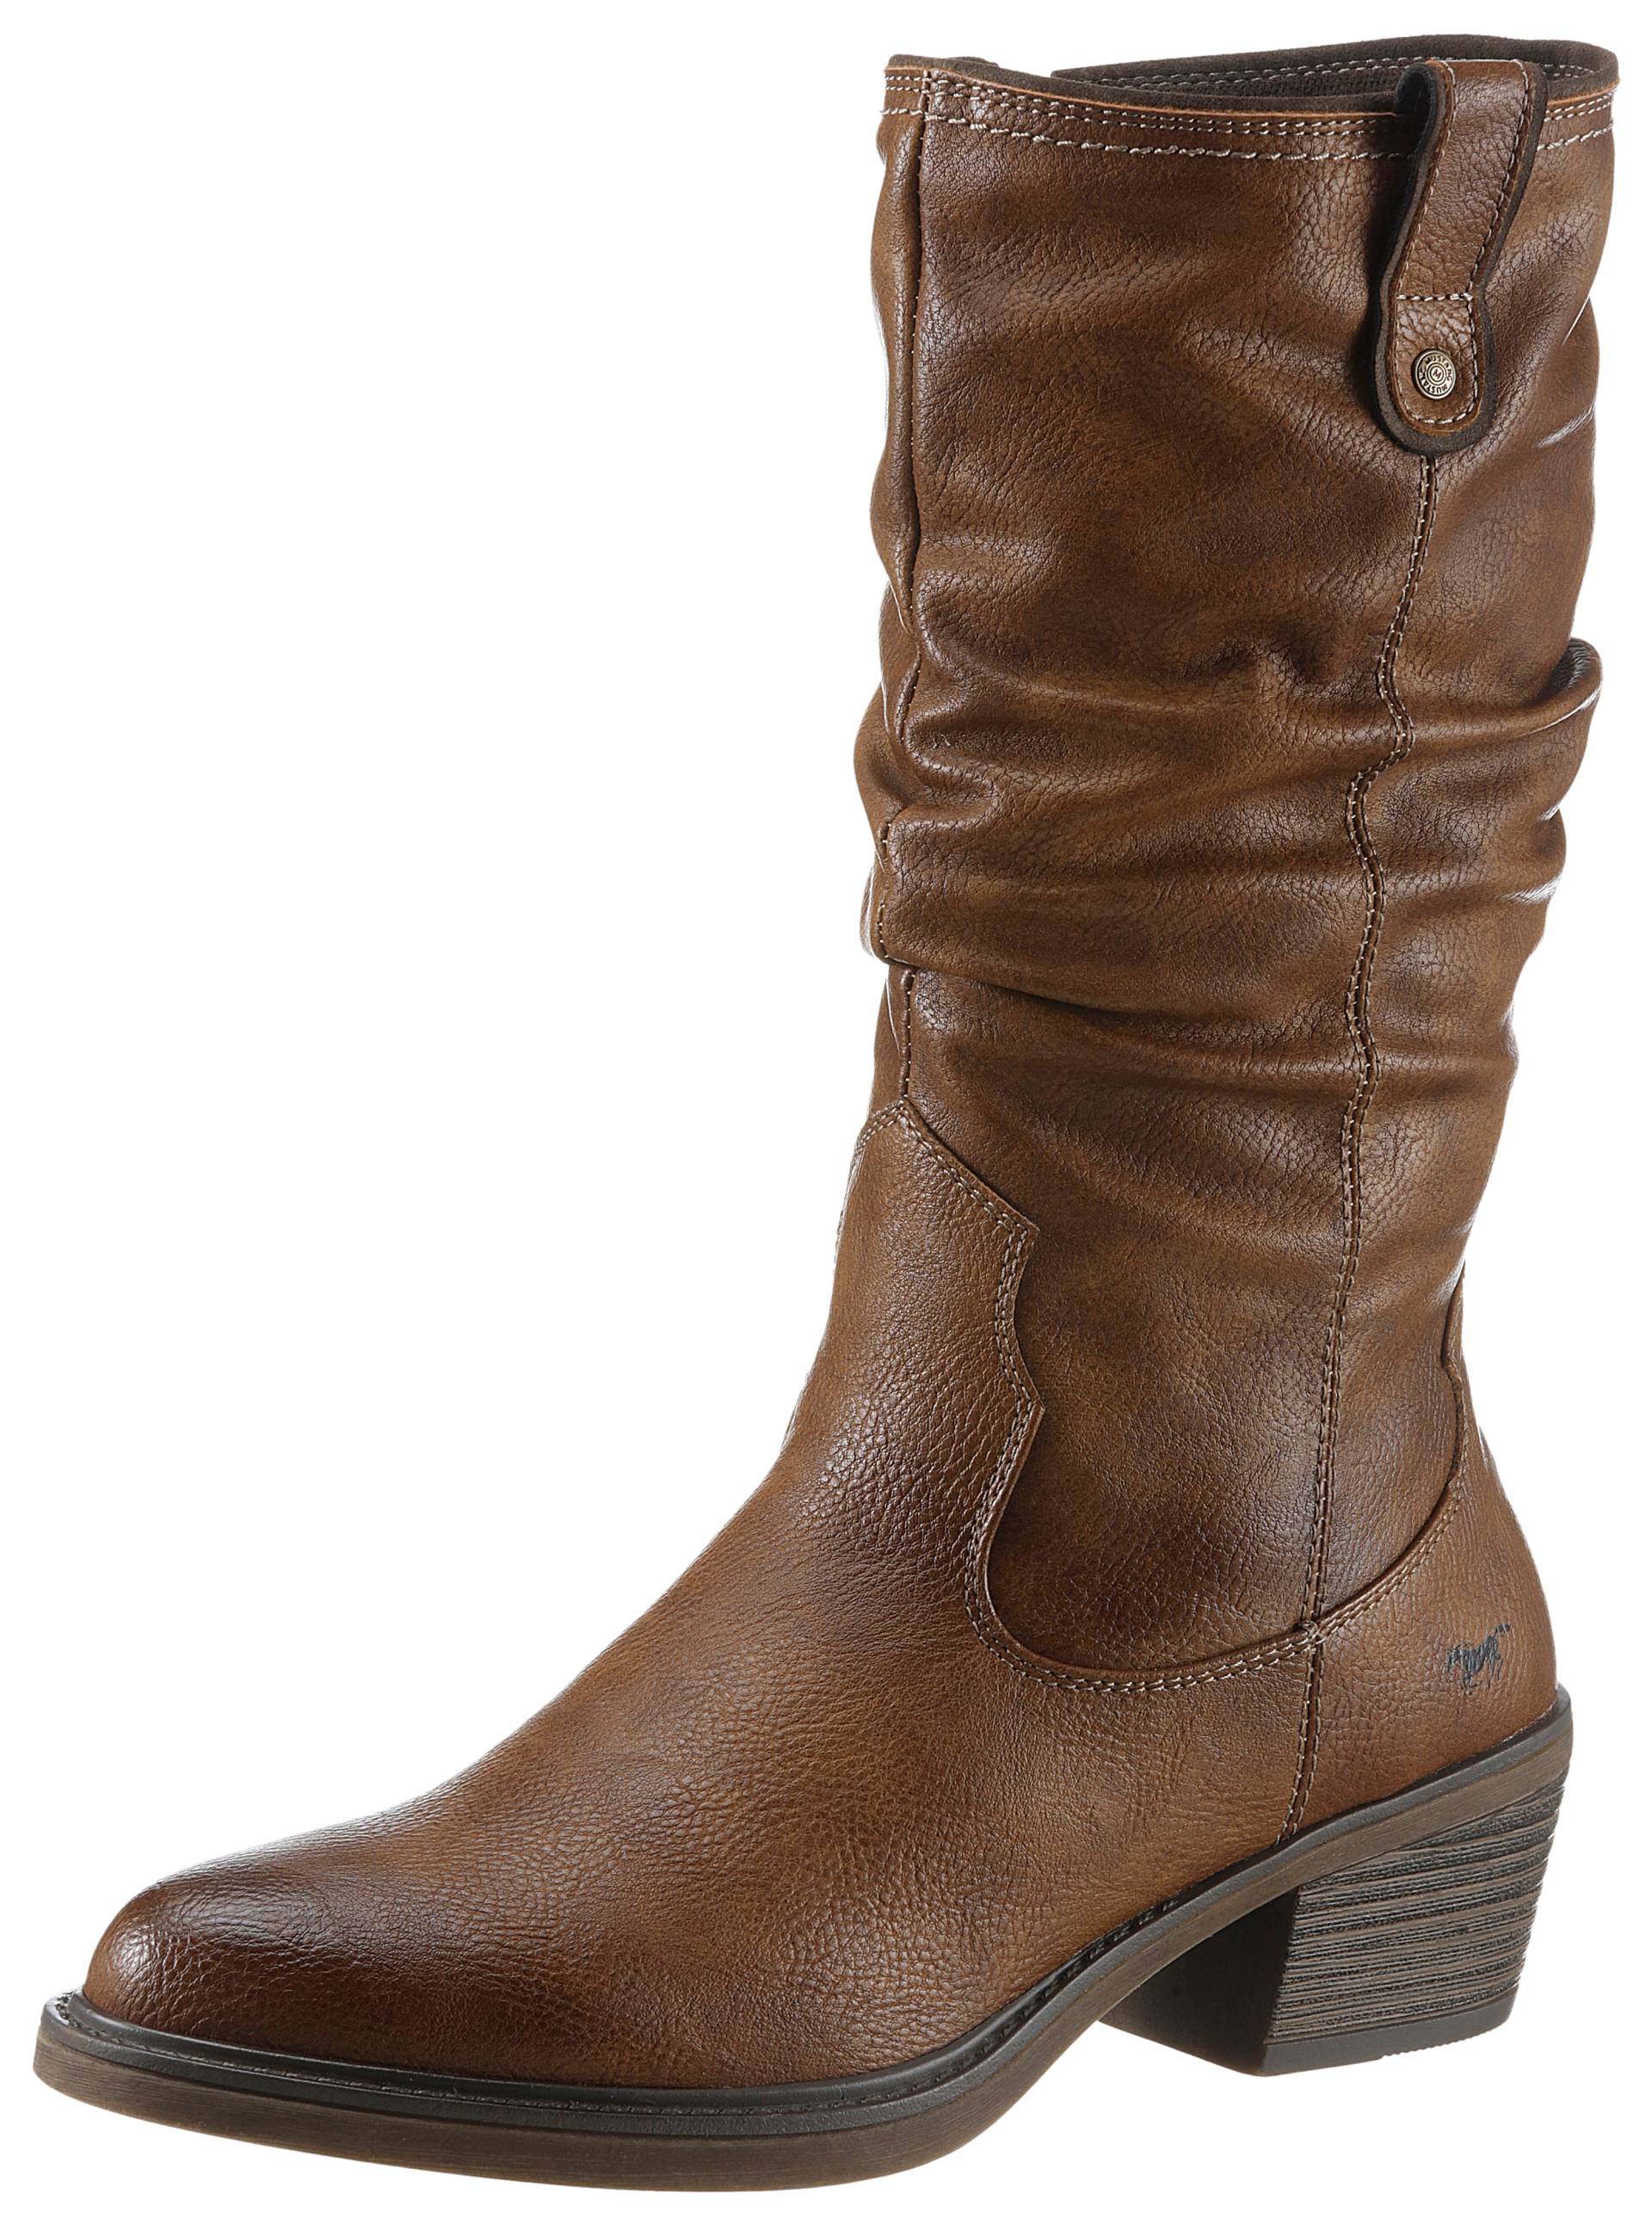 Mustang Shoes Cowboystiefel von mustang shoes